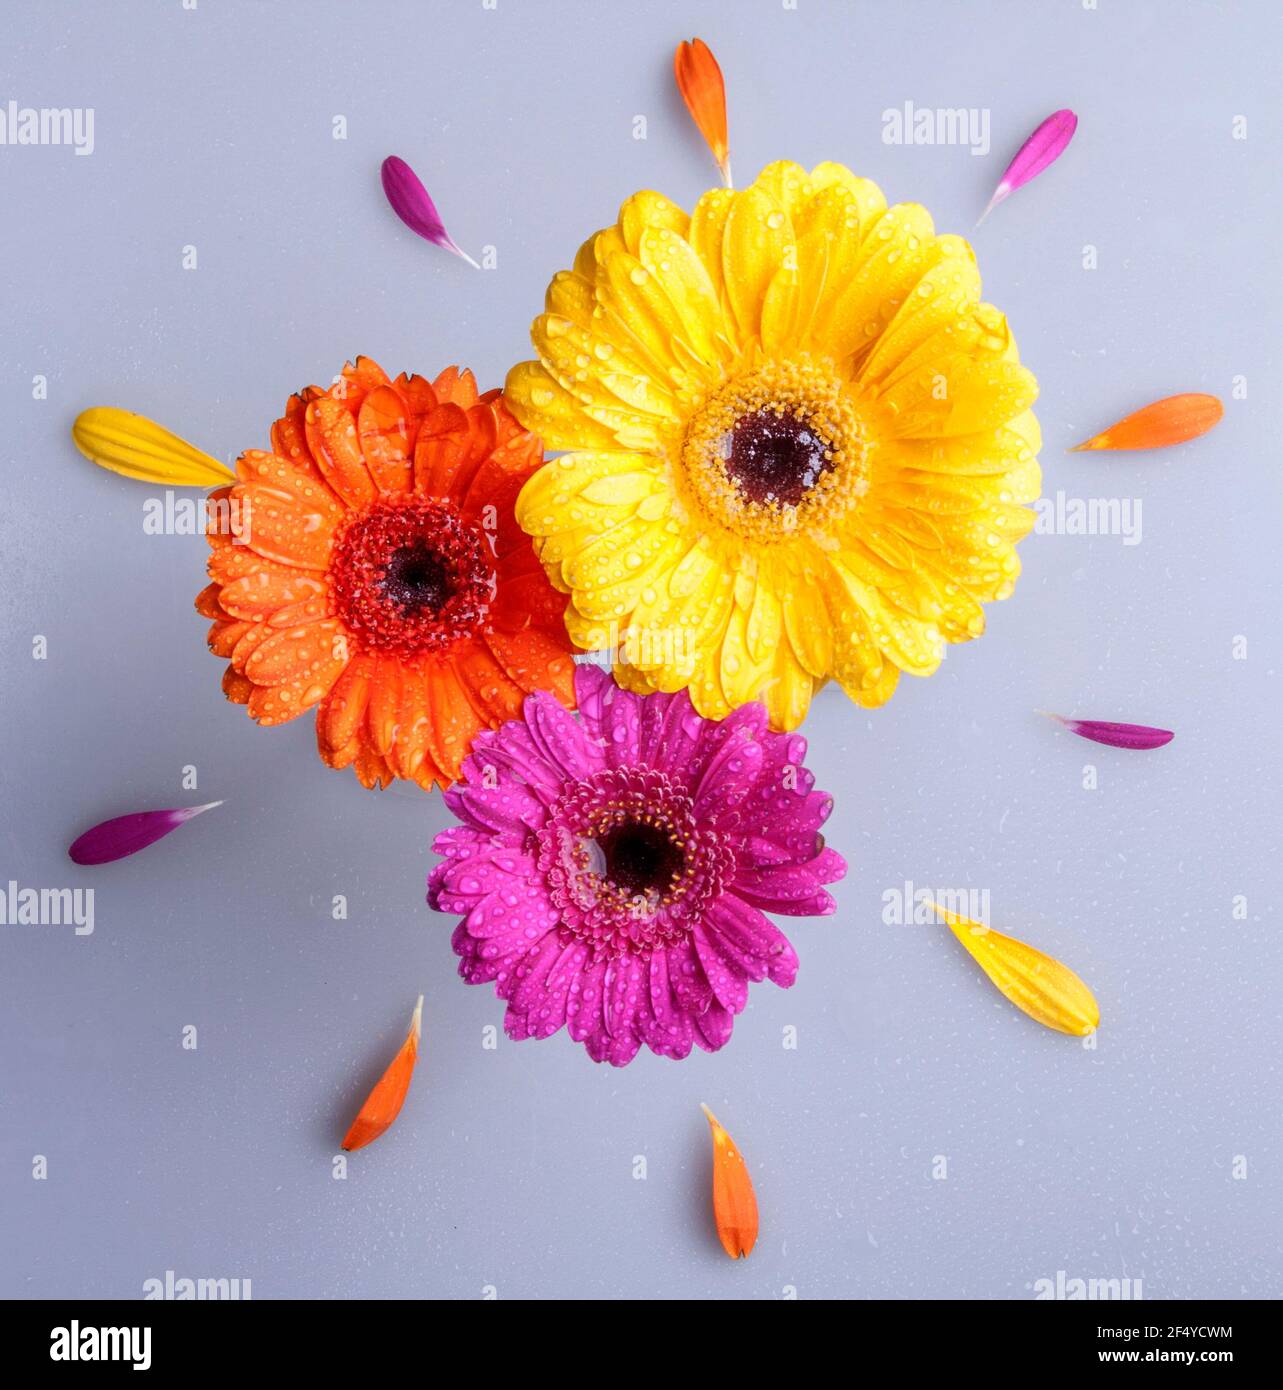 3 Vibrant colourful gerbera daisies upclose isolated on white background Stock Photo